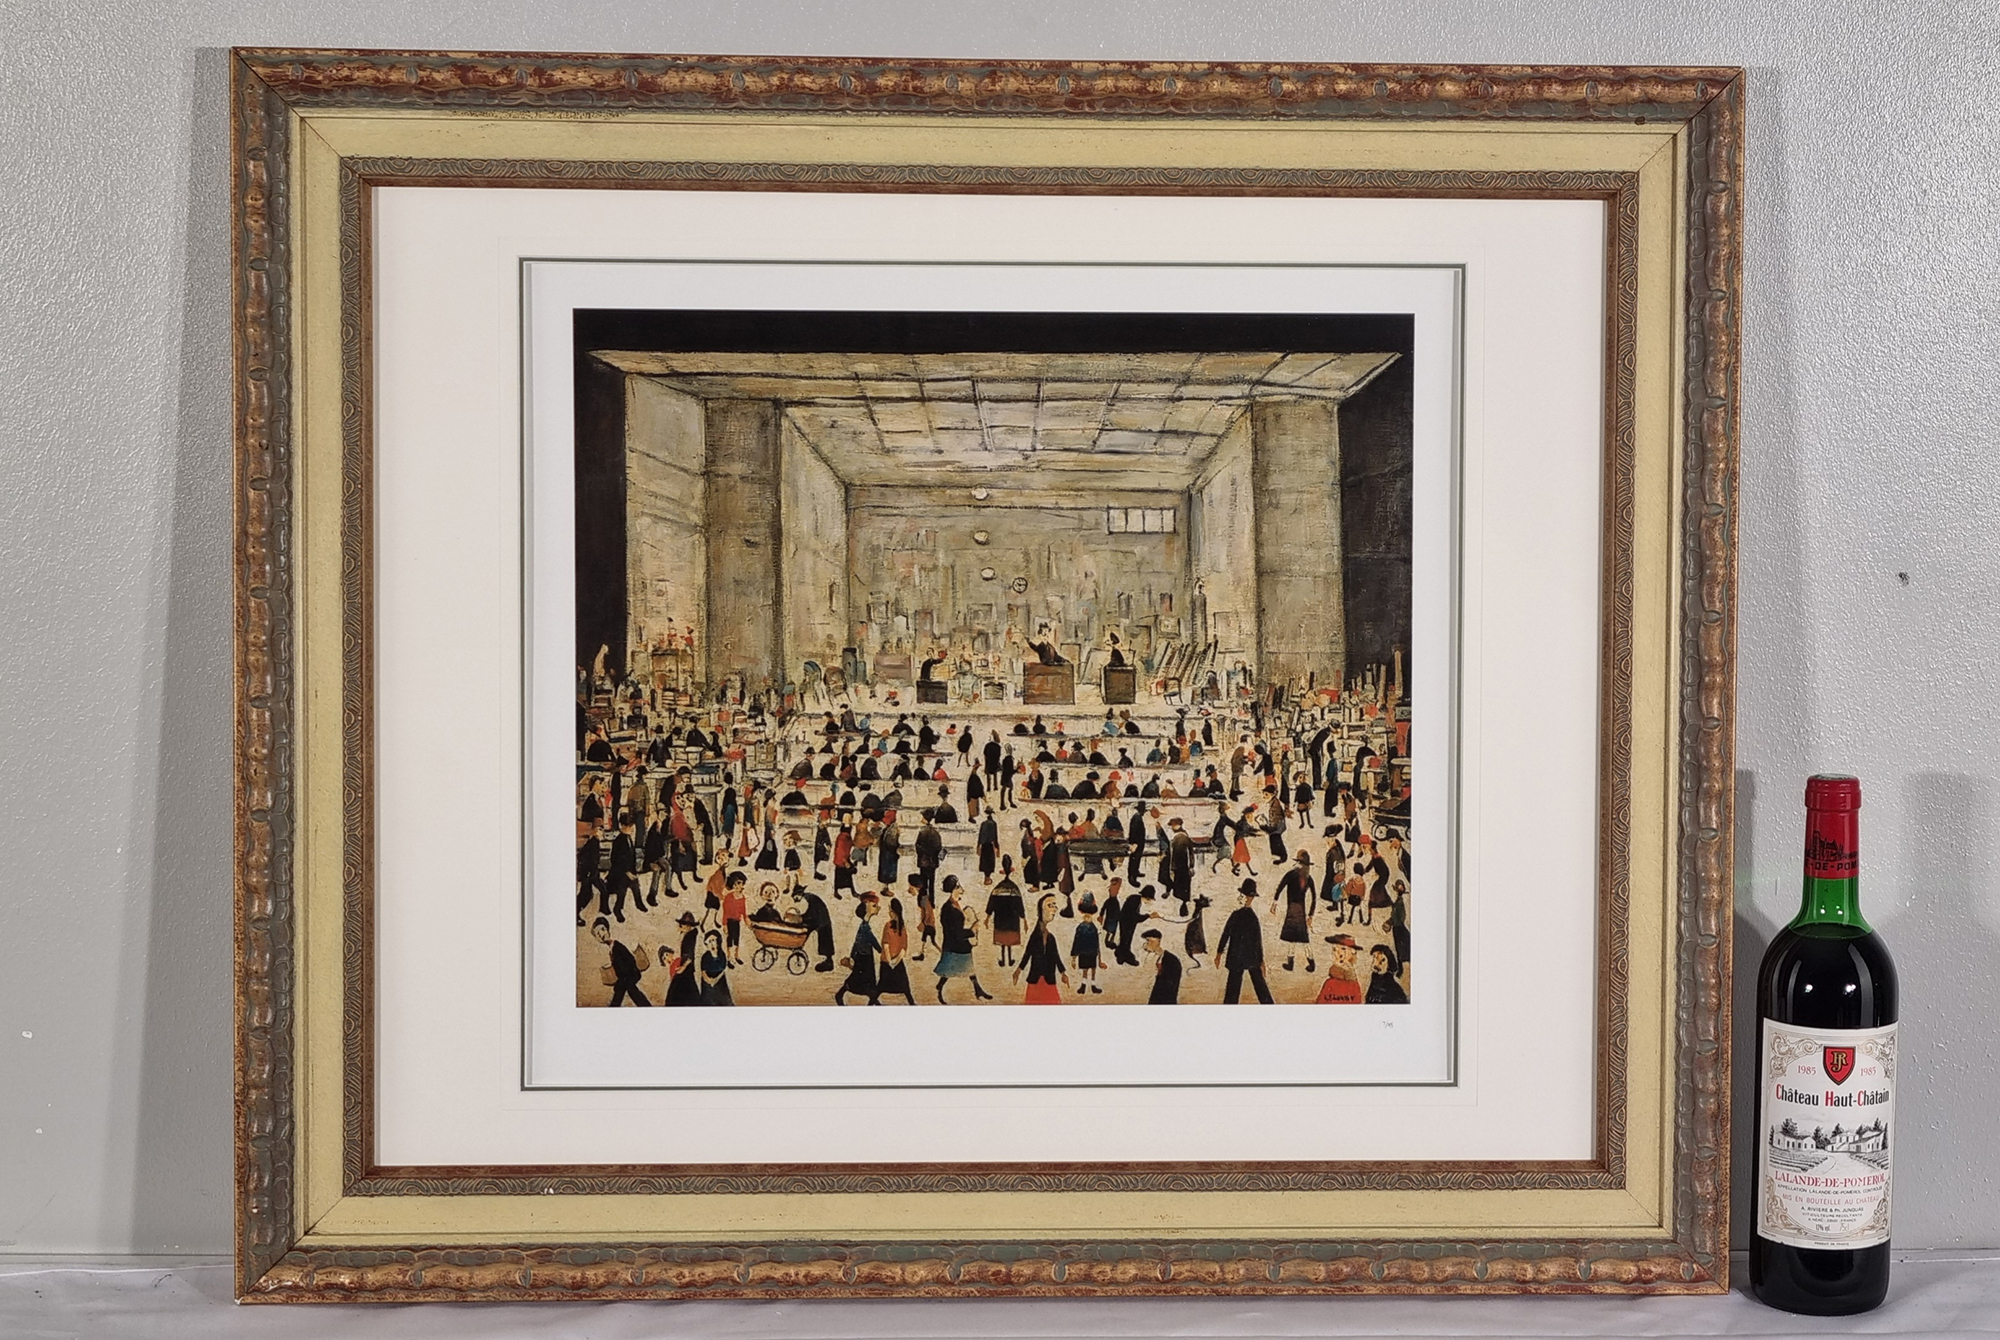 L.S. Lowry Limited Edition """"The Auction"""" - Image 8 of 9